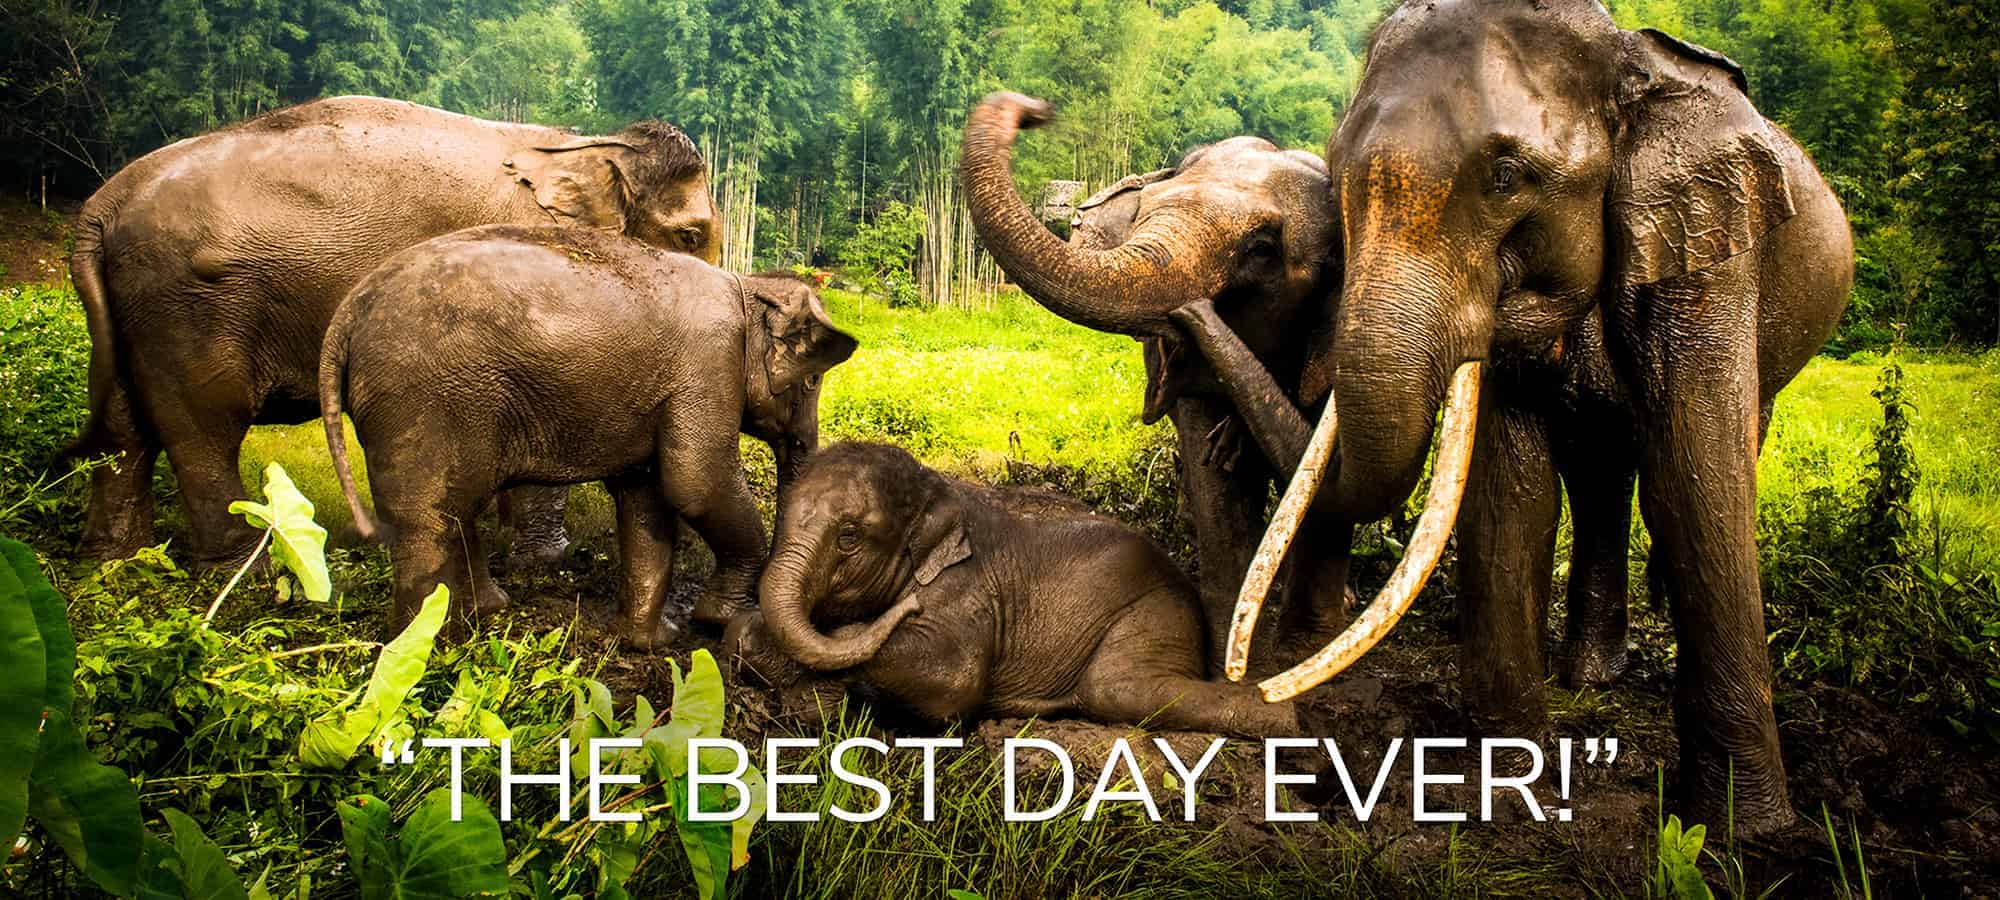 You want to be UP-CLOSE AND PERSONAL WITH ELEPHANTS? Come to the ELEPHANT ECOVALLEY for the best day trips from Chiang Mai.